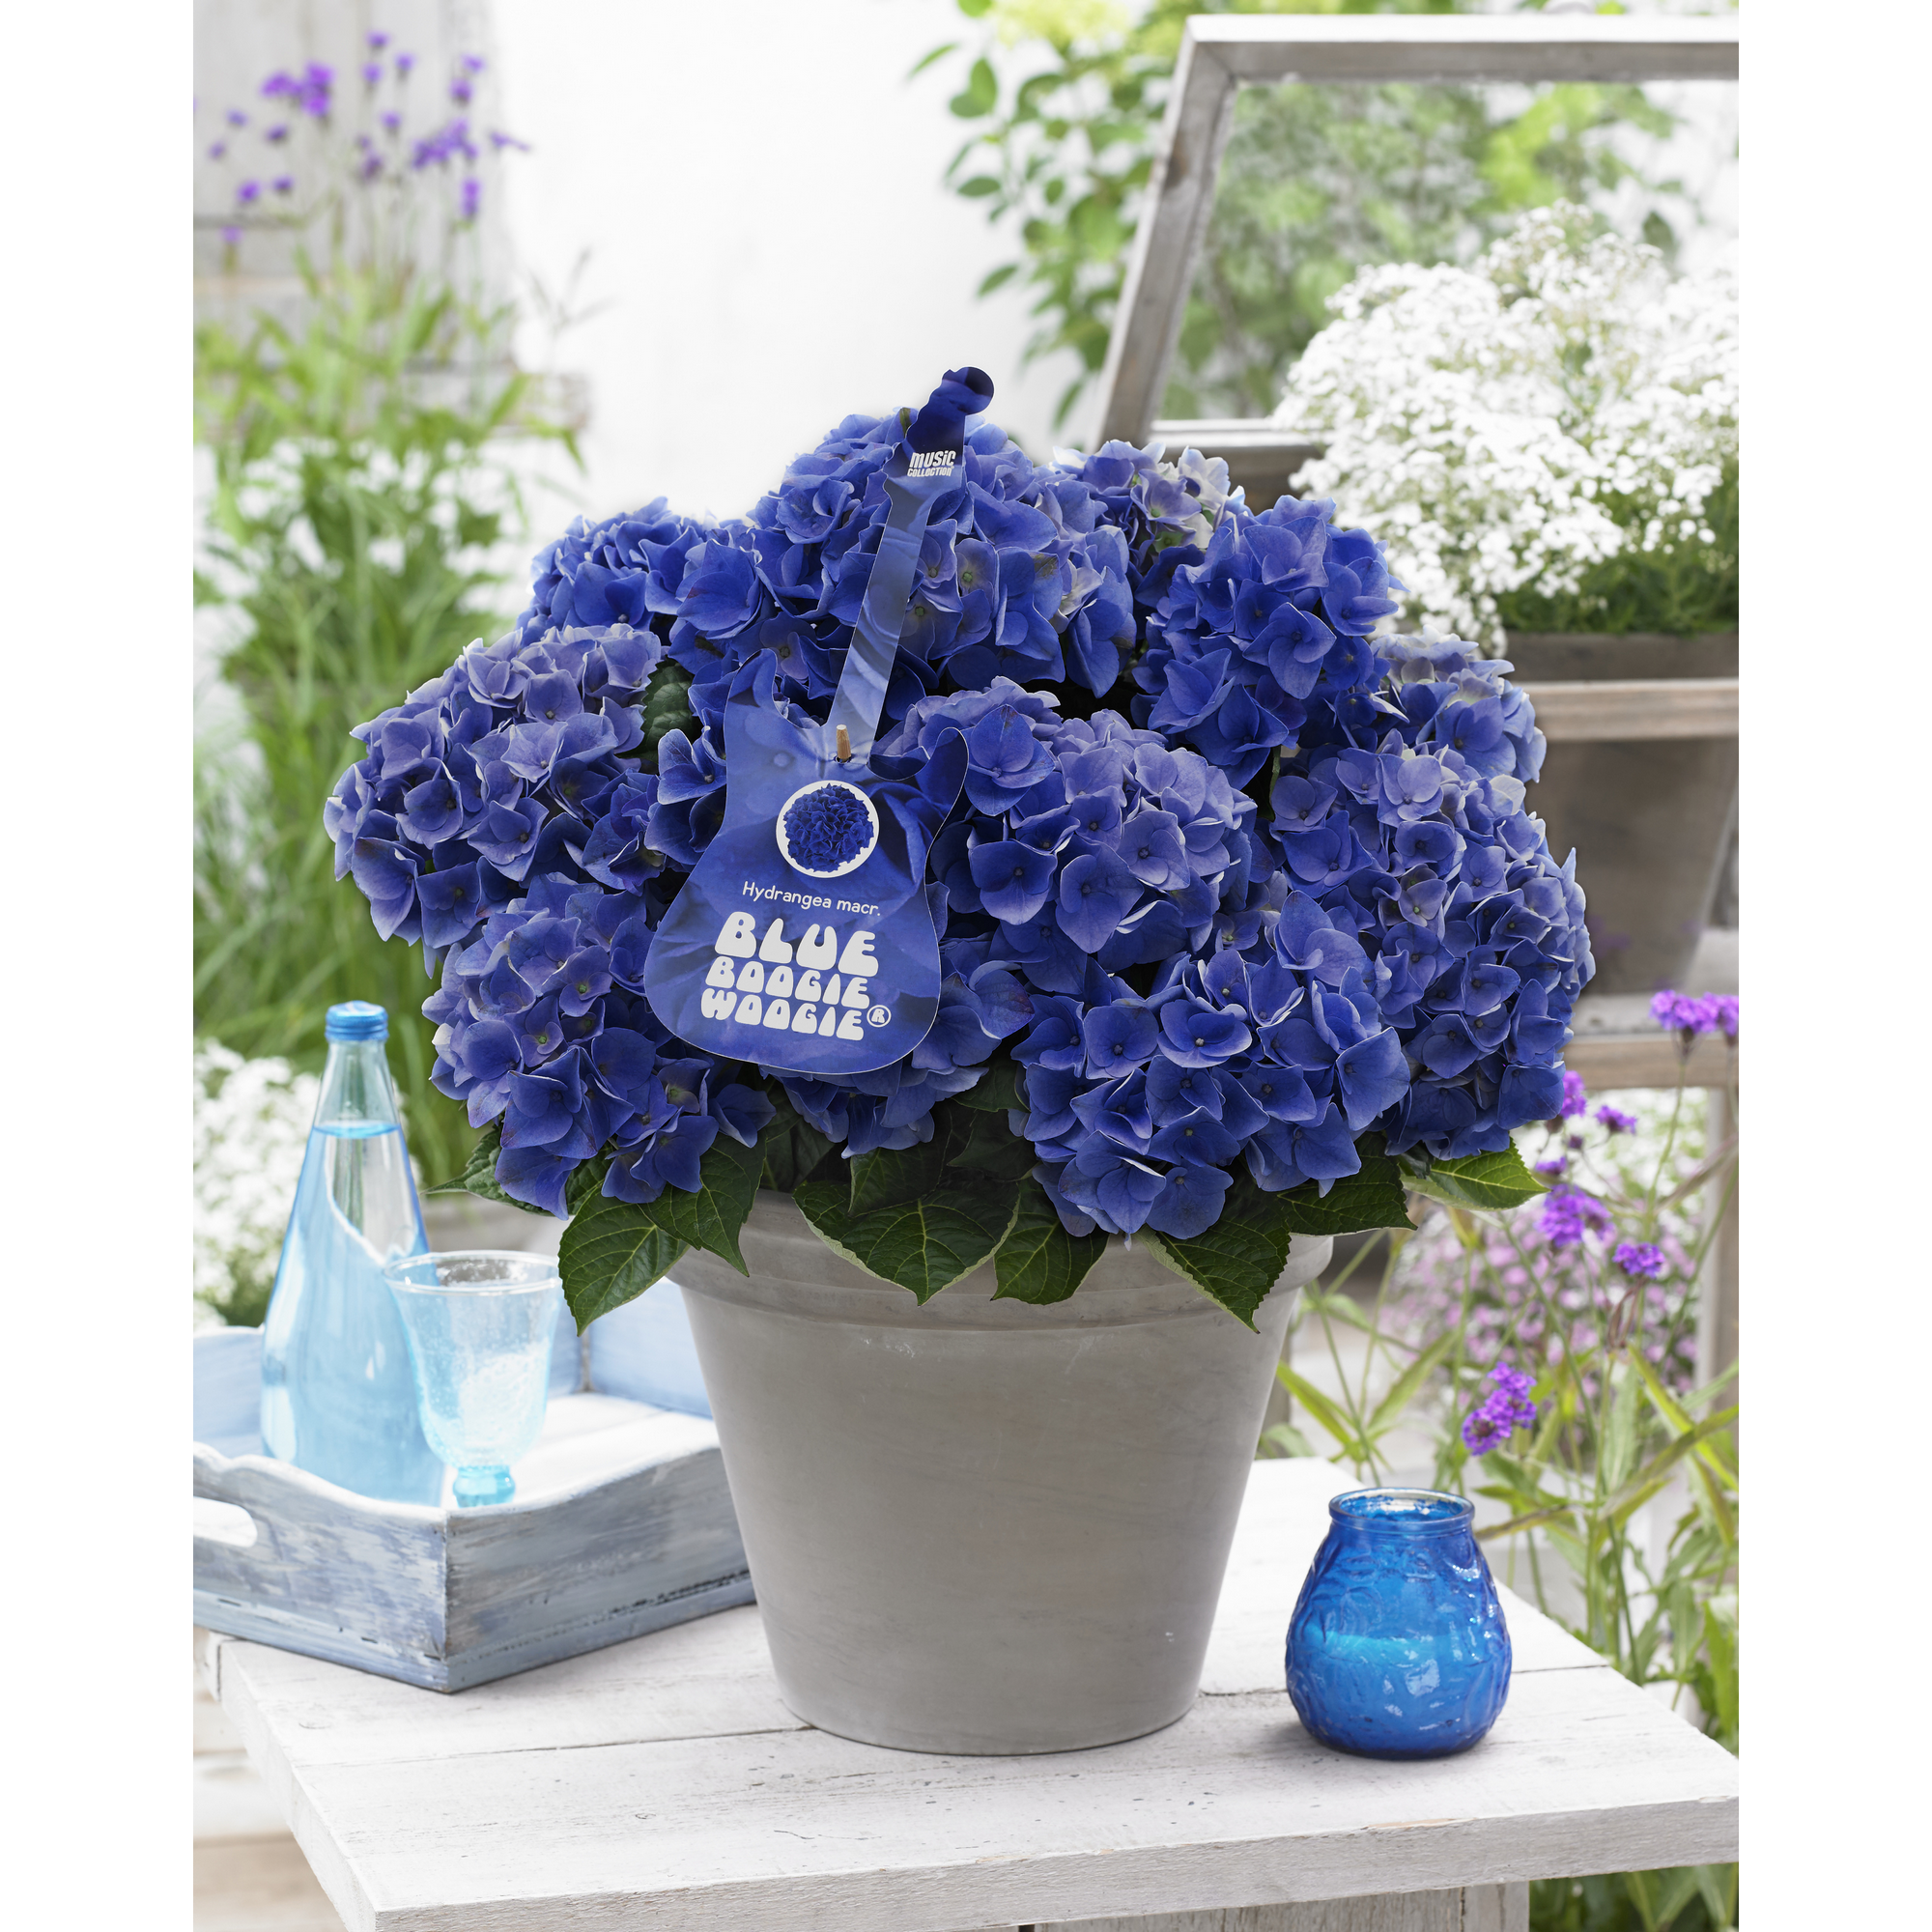 Hortensie 'Music Collection Blue Boogie Woogie®', Topf Ø 23 cm + product picture